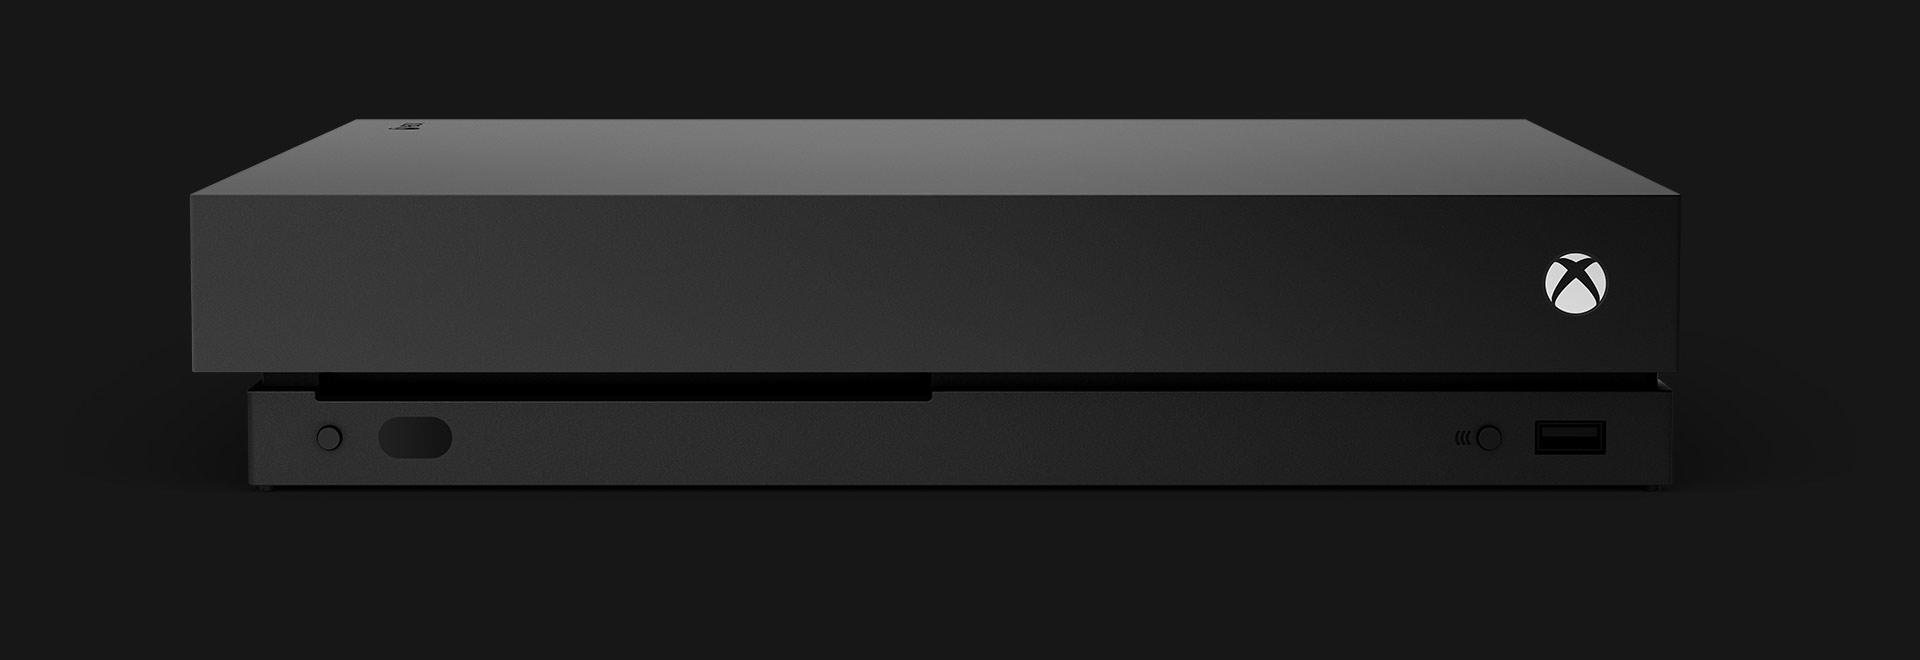 The front view of an Xbox One X console.